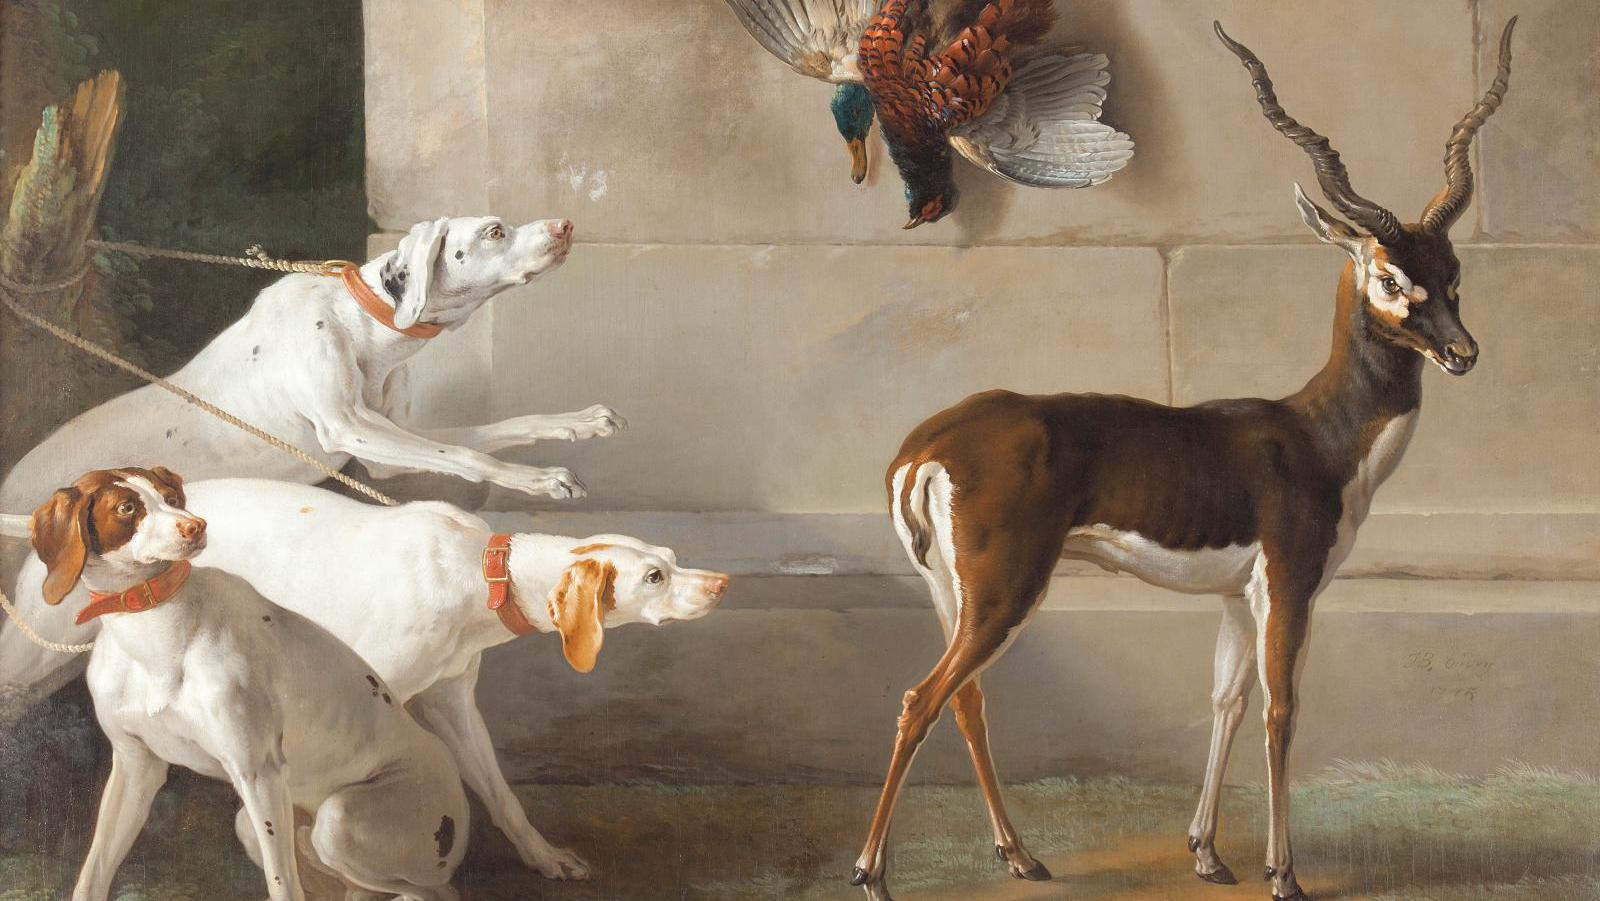 Jean-Baptiste Oudry (1686-1755), Trois chiens devant une antilope, (Three Dogs before... Royal Animals and Political Beasts During the Enlightenment